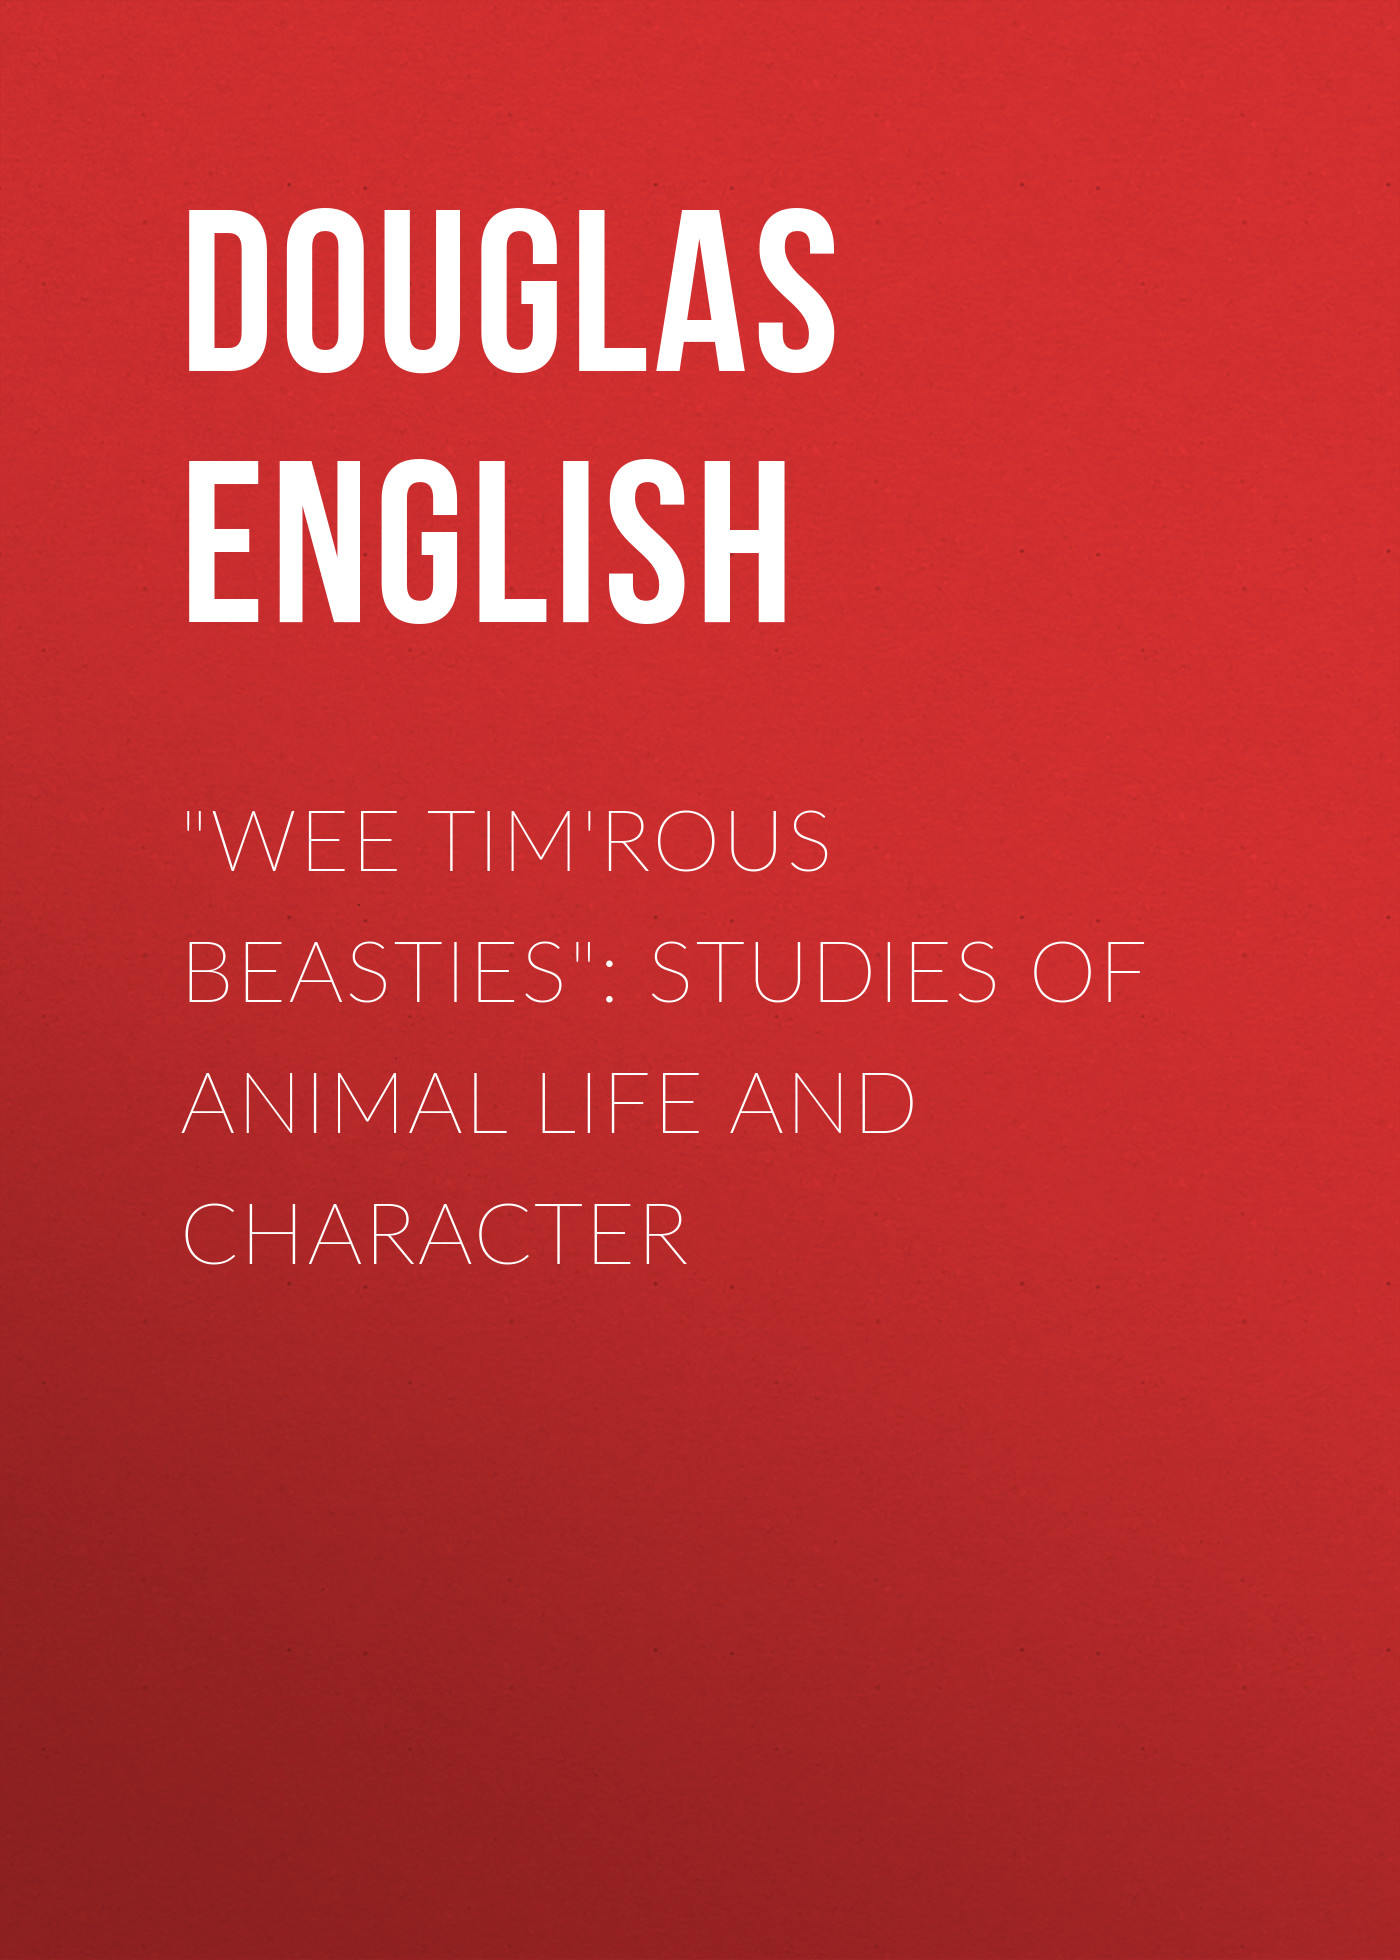 "Wee Tim'rous Beasties": Studies of Animal life and Character